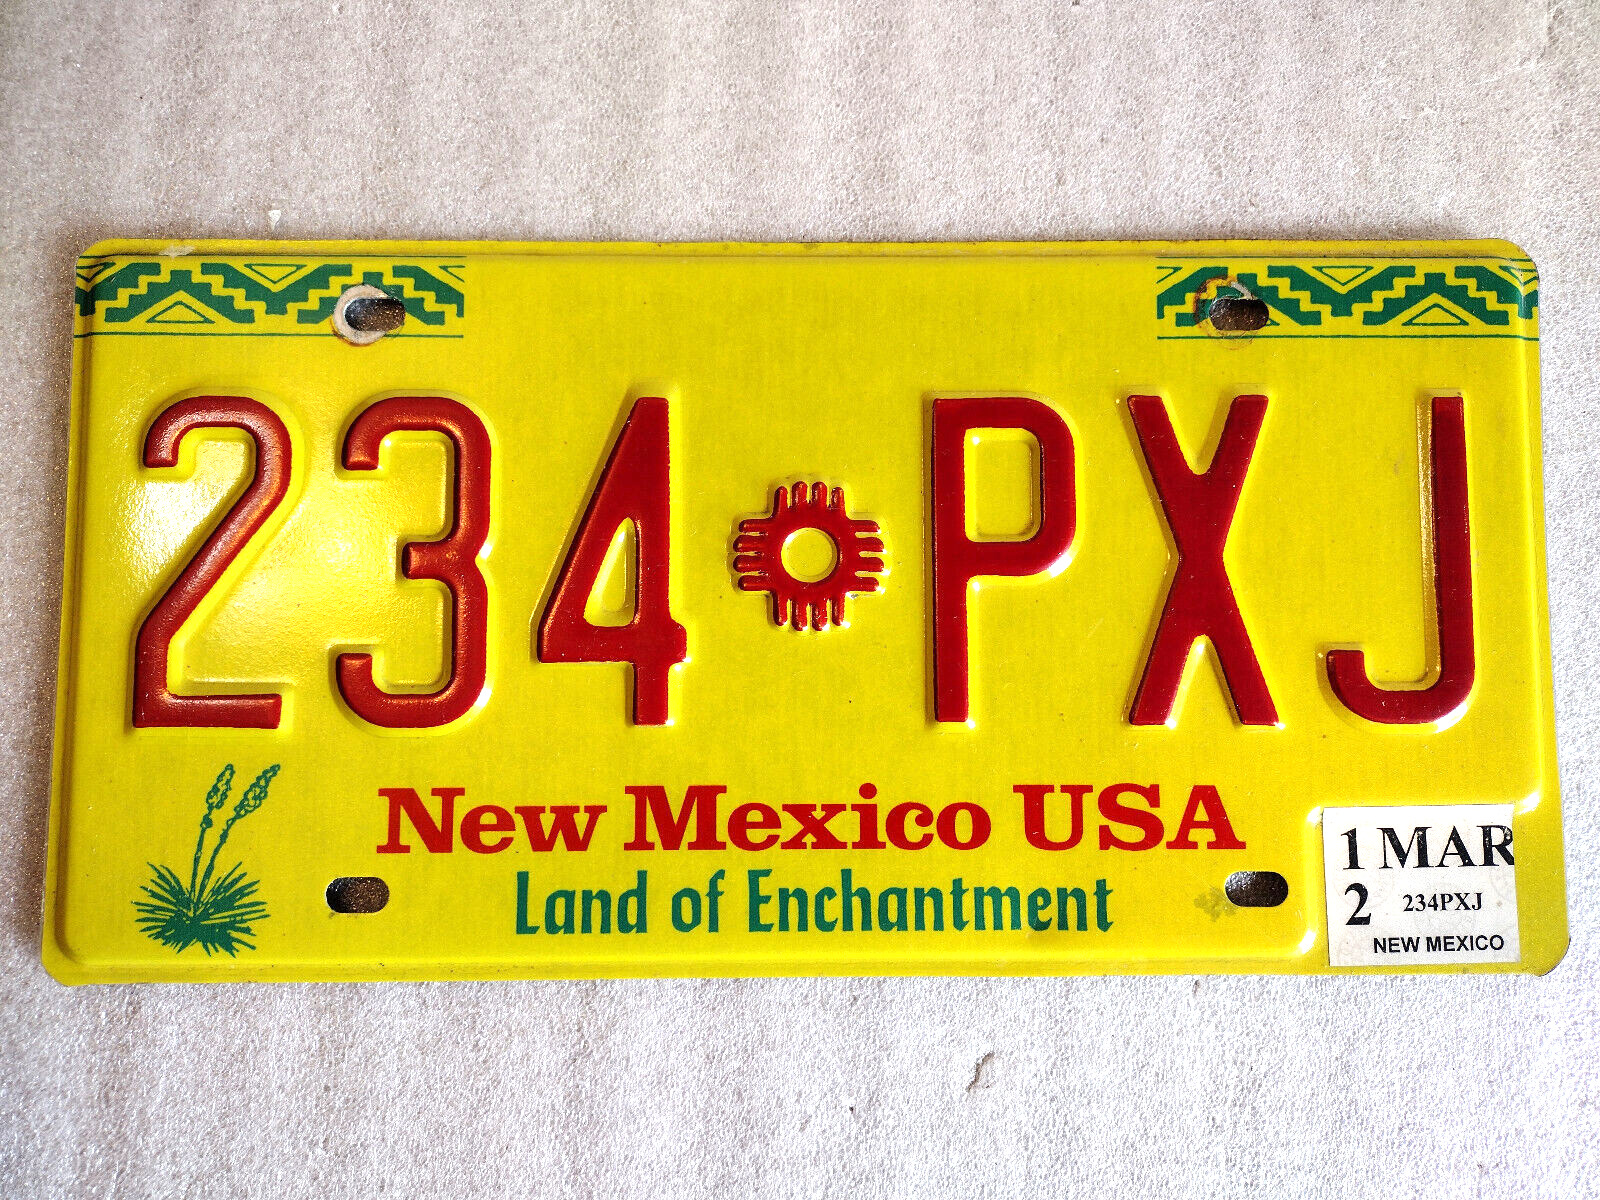 2012 New Mexico License Plate Yellow Red Land of Enchantment 234 PXJ